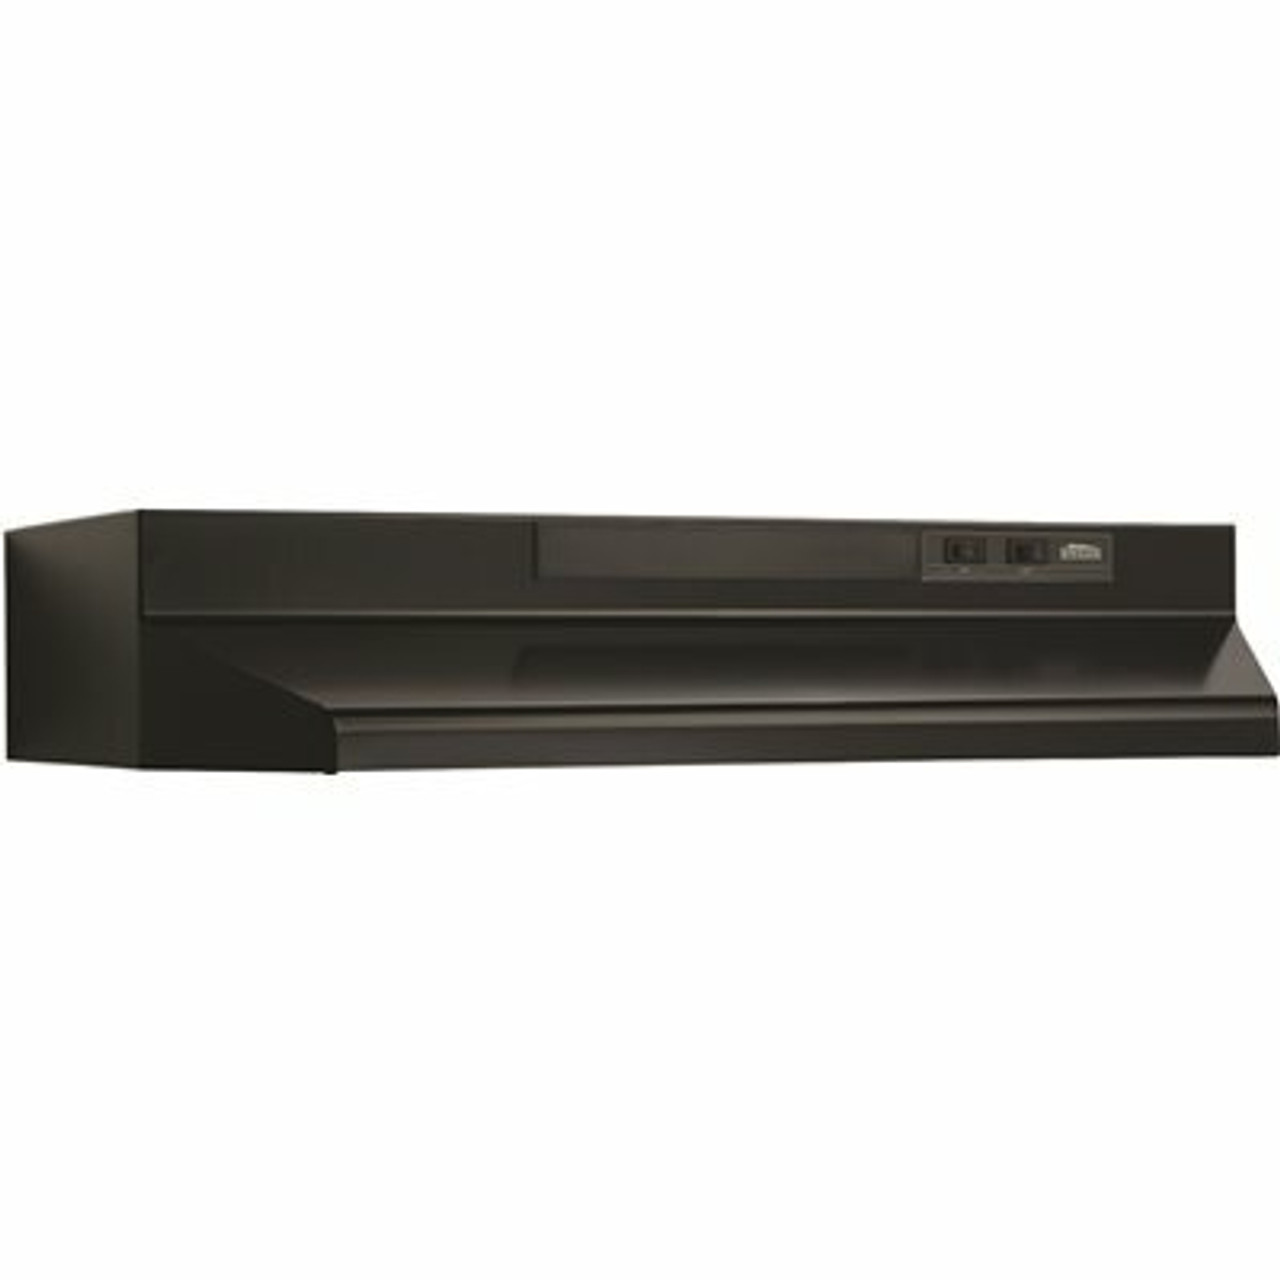 Broan-Nutone Buez3 30 In. 260 Max Blower Cfm Convertible Under-Cabinet Range Hood With Light And Easy Install System In Black